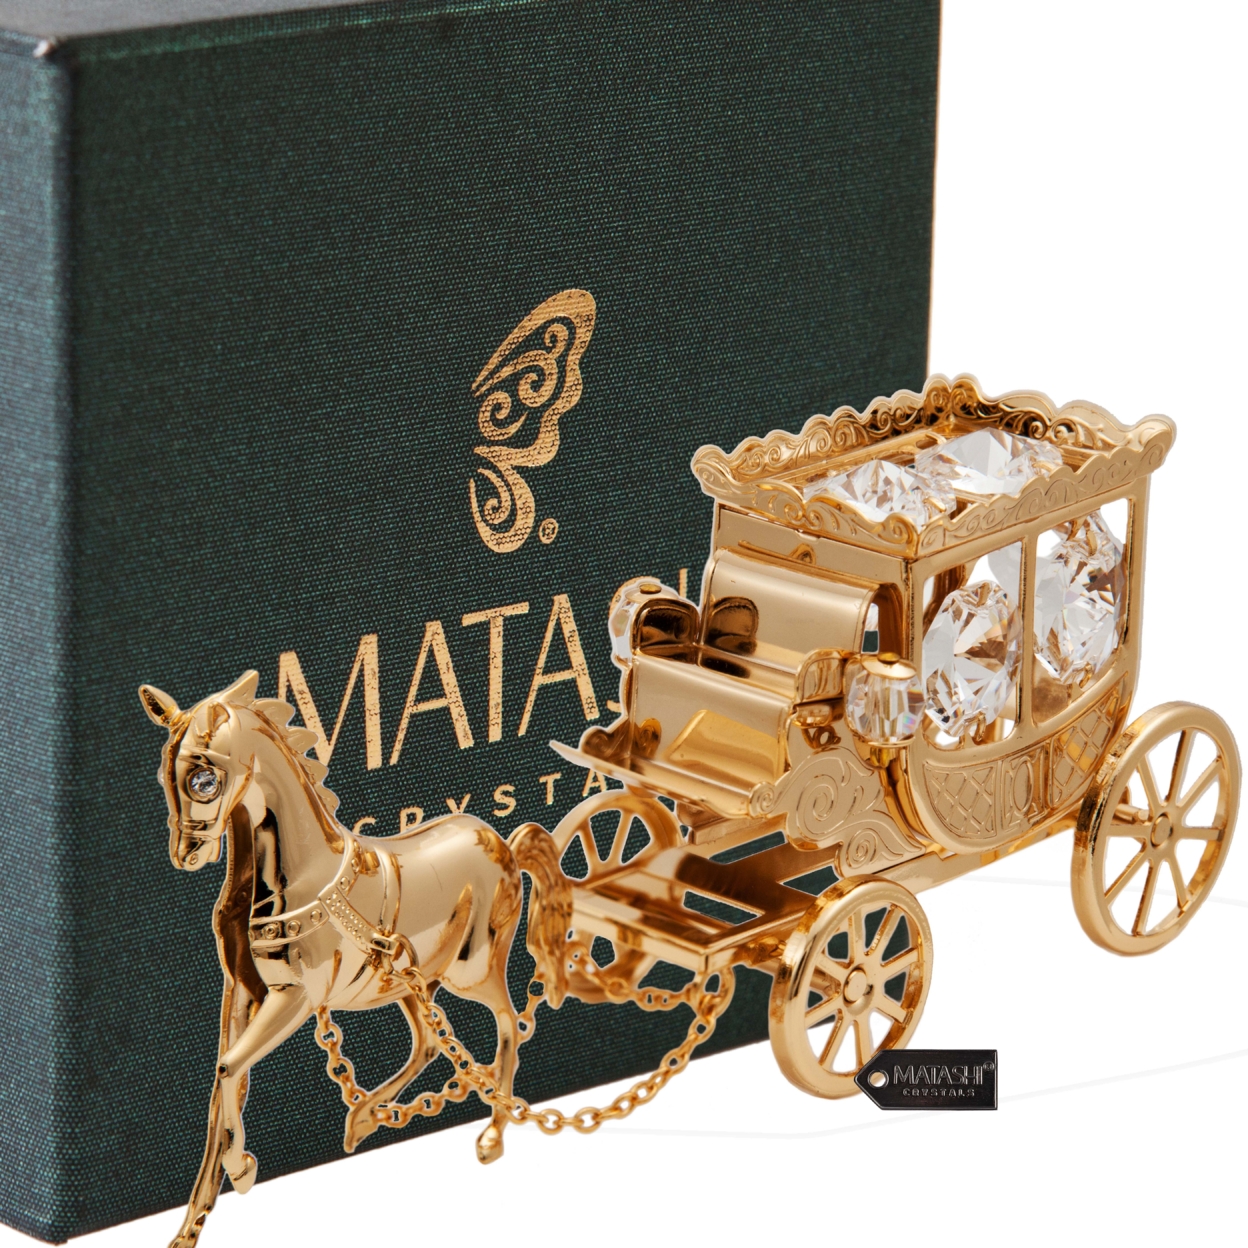 Matashi 24K Gold Plated Crystal Studded Horse Drawn Carriage Ornament Tabletop Showpiece Gift For Christams Valentine's Day Mother's Day